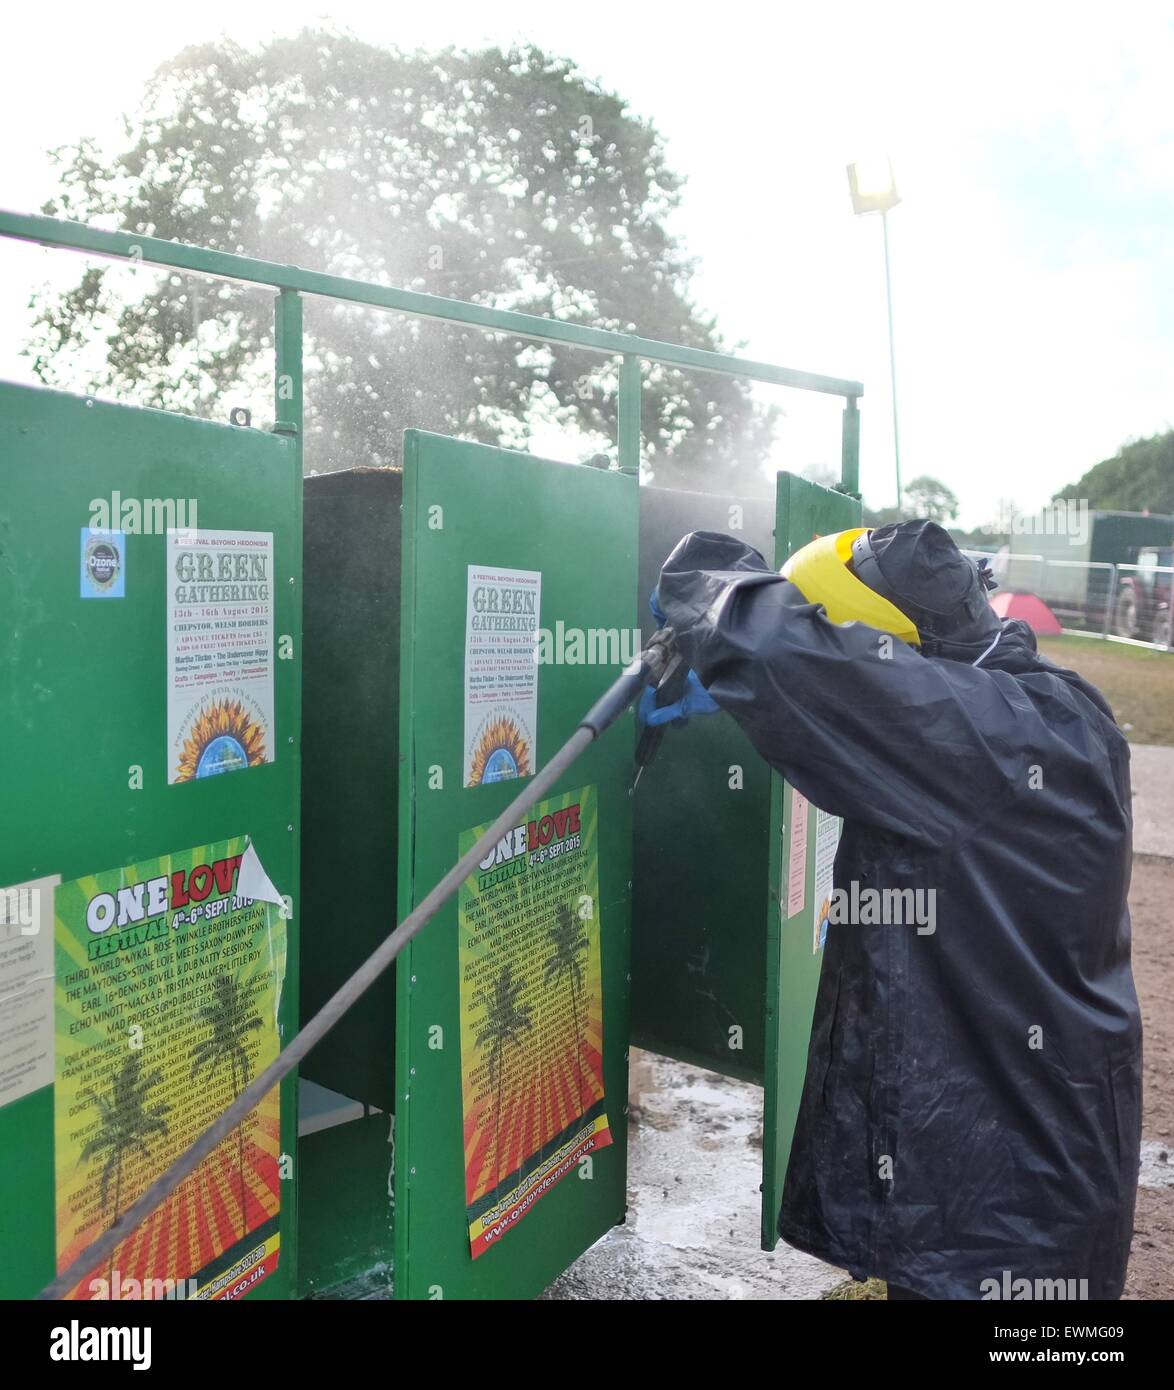 Glastonbury Festival, Somerset, UK. 29 June 2015. As the exodus from the festival site gets underway the clean up begins in earnest and the notorious long drop toilets get the pressure washer treatment. Credit:  Tom Corban/Alamy Live News Stock Photo